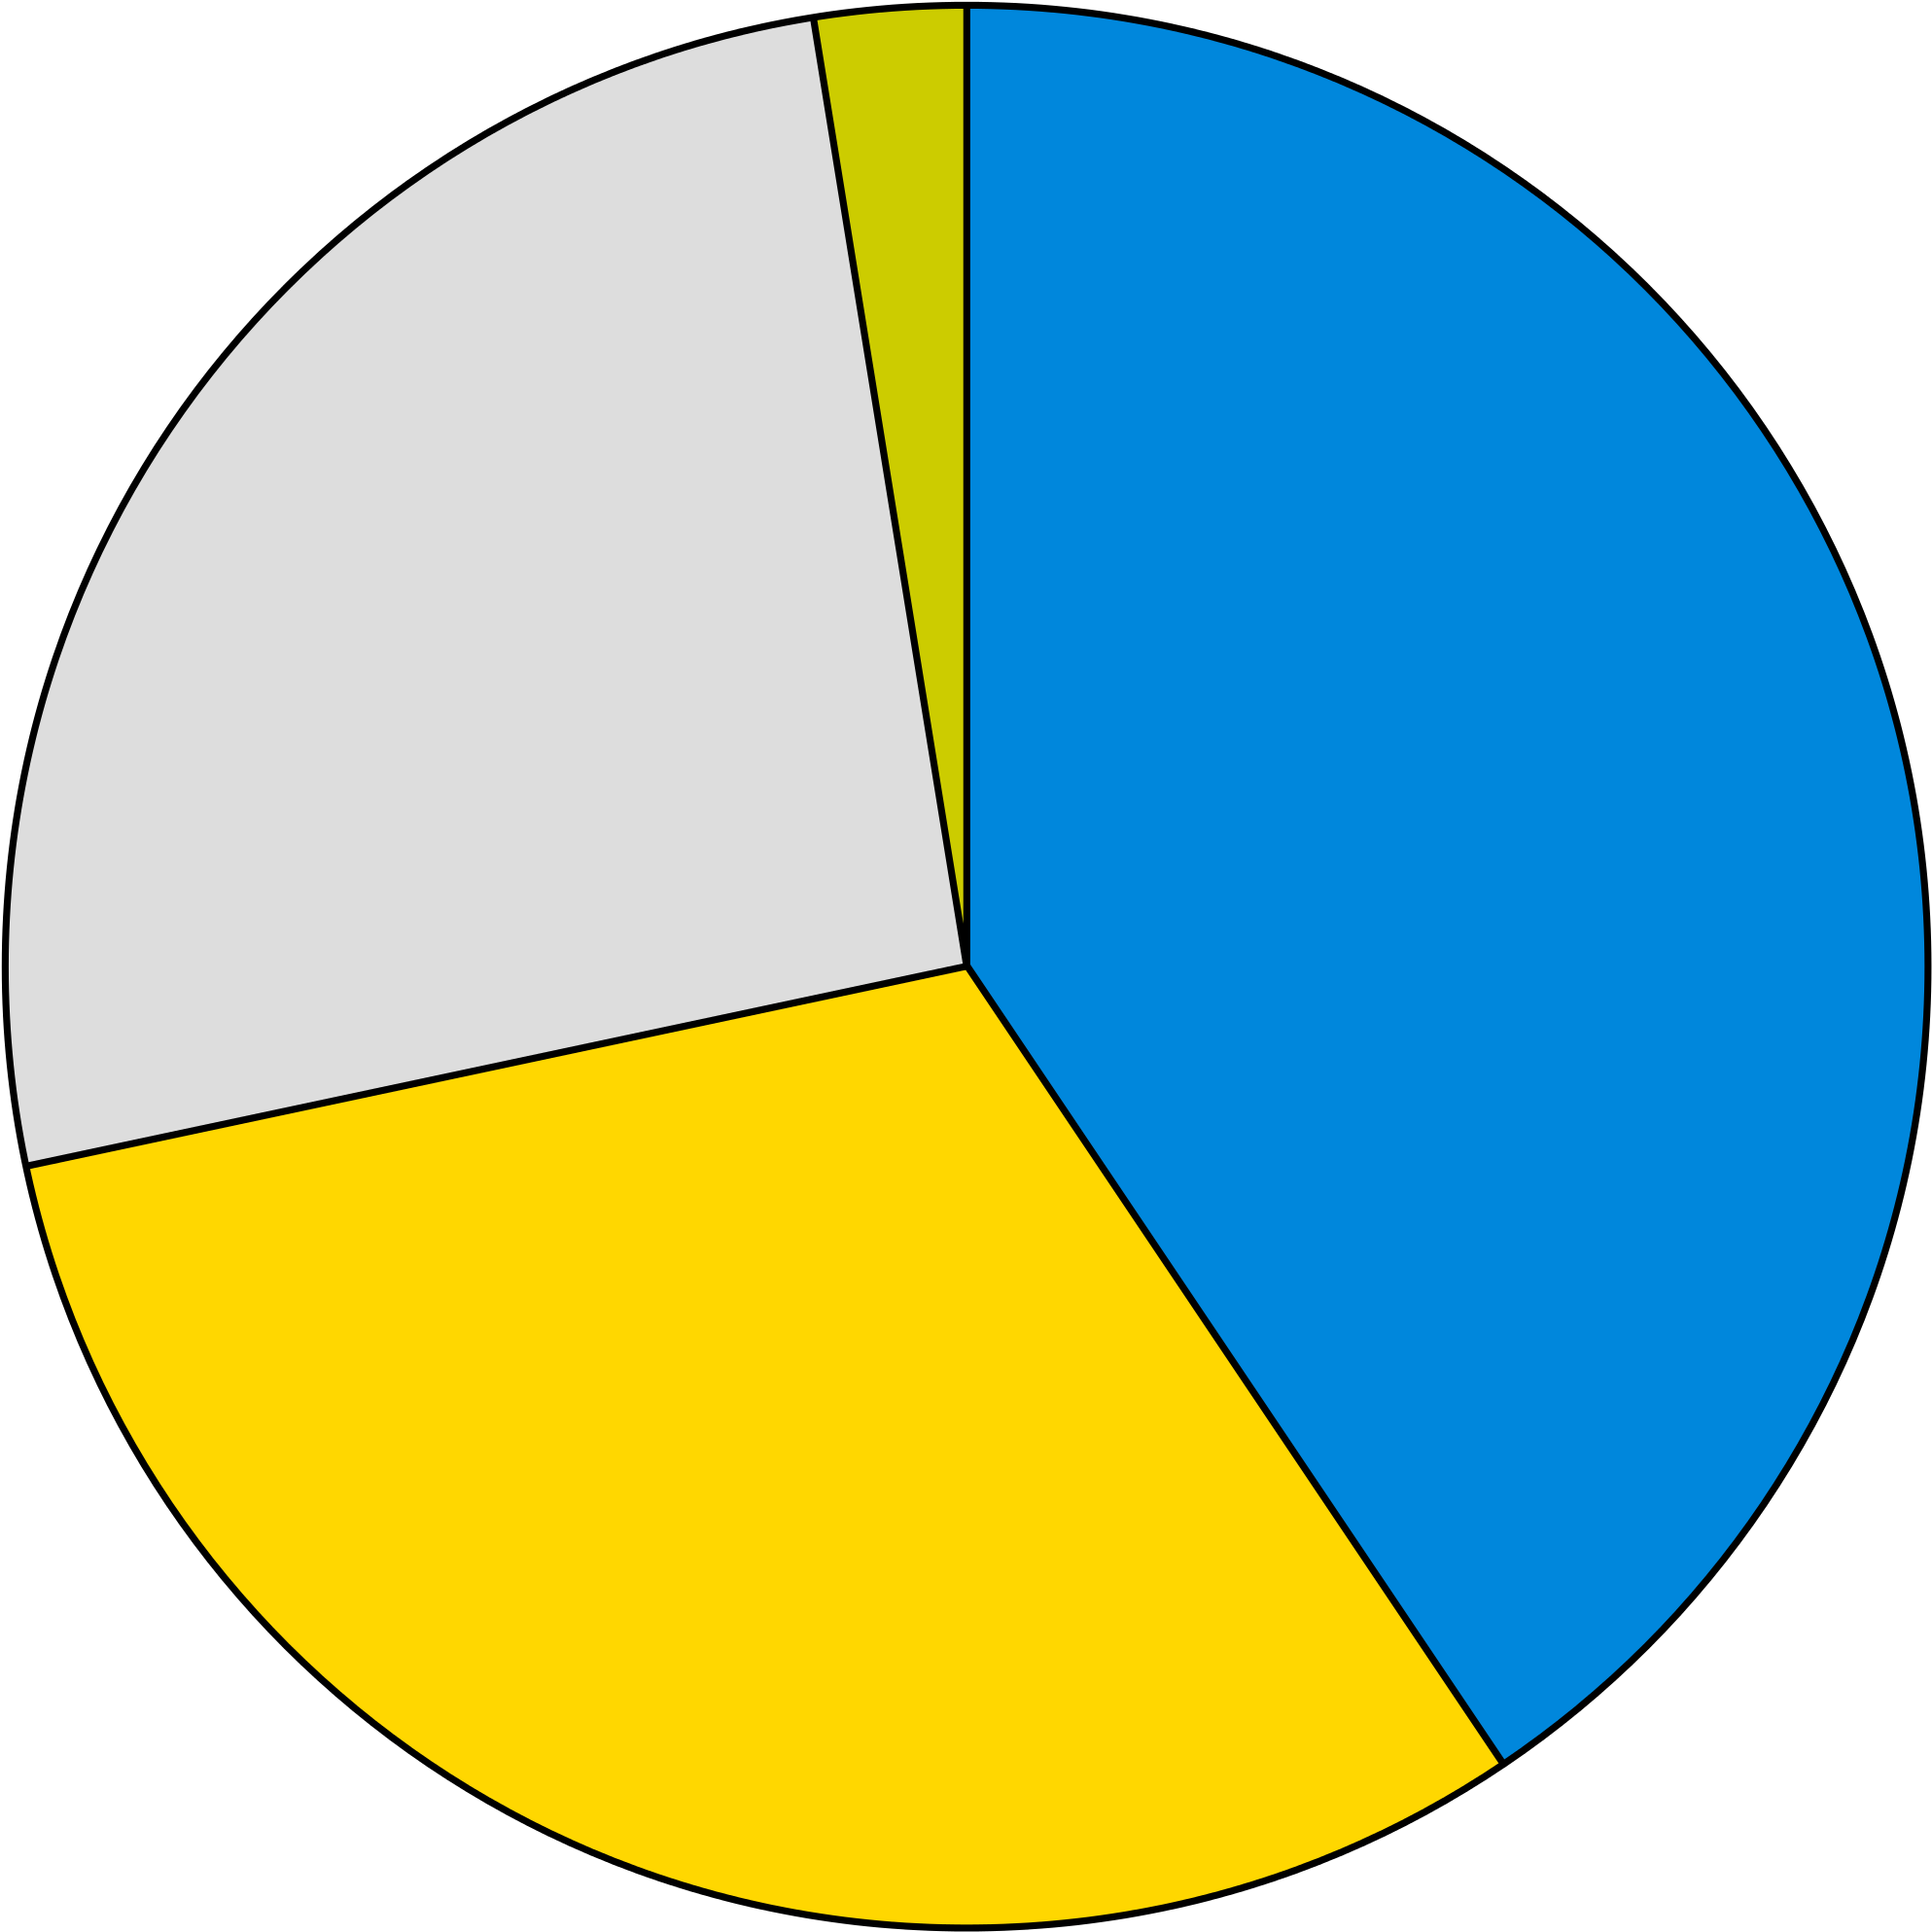 Open - 4 Section Pie Chart (2000x2000)